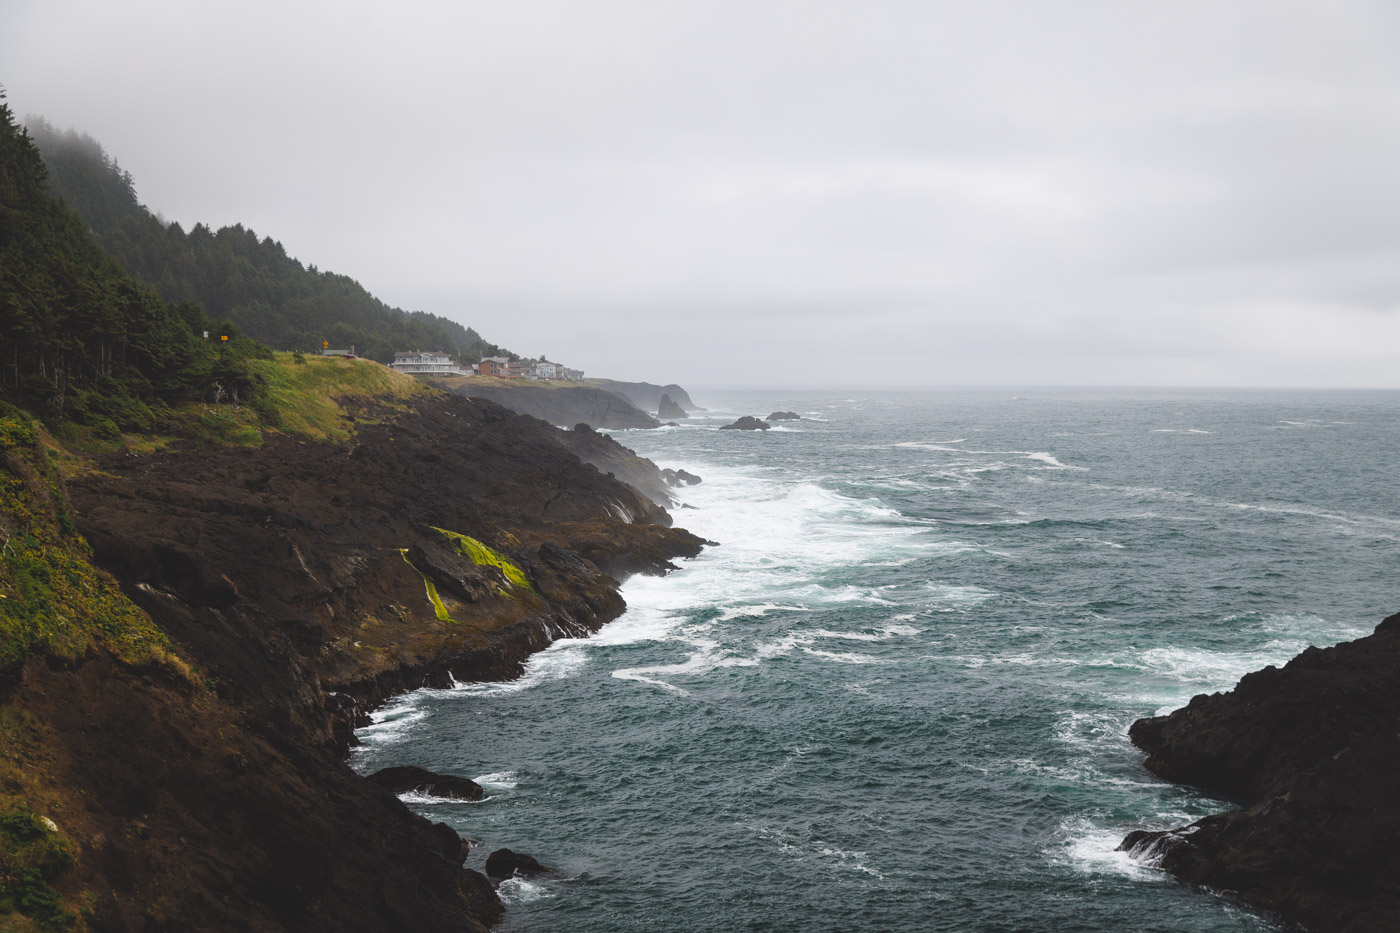 Coastline view from Rocky Creek State Scenic Viewpoint on an overcast day in Newport.